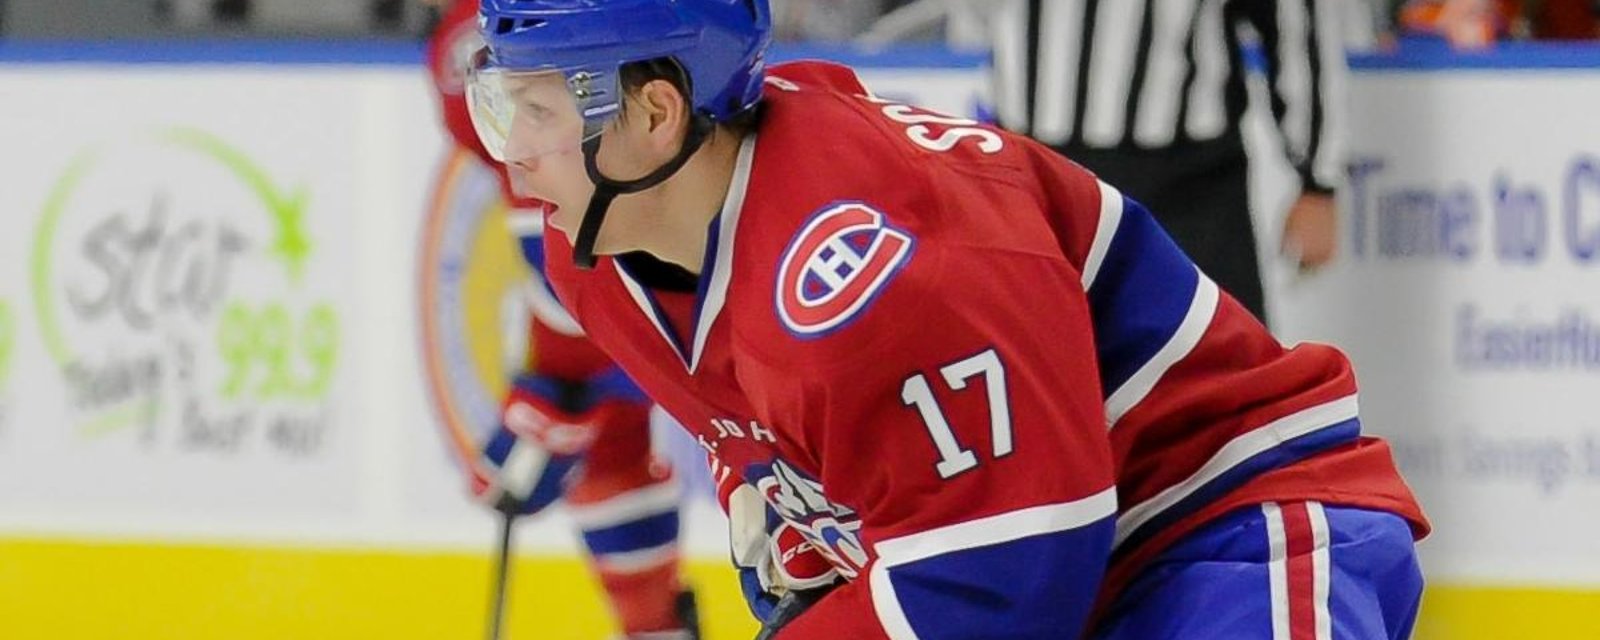 Breaking: Habs' young forward won't return after suffering injury